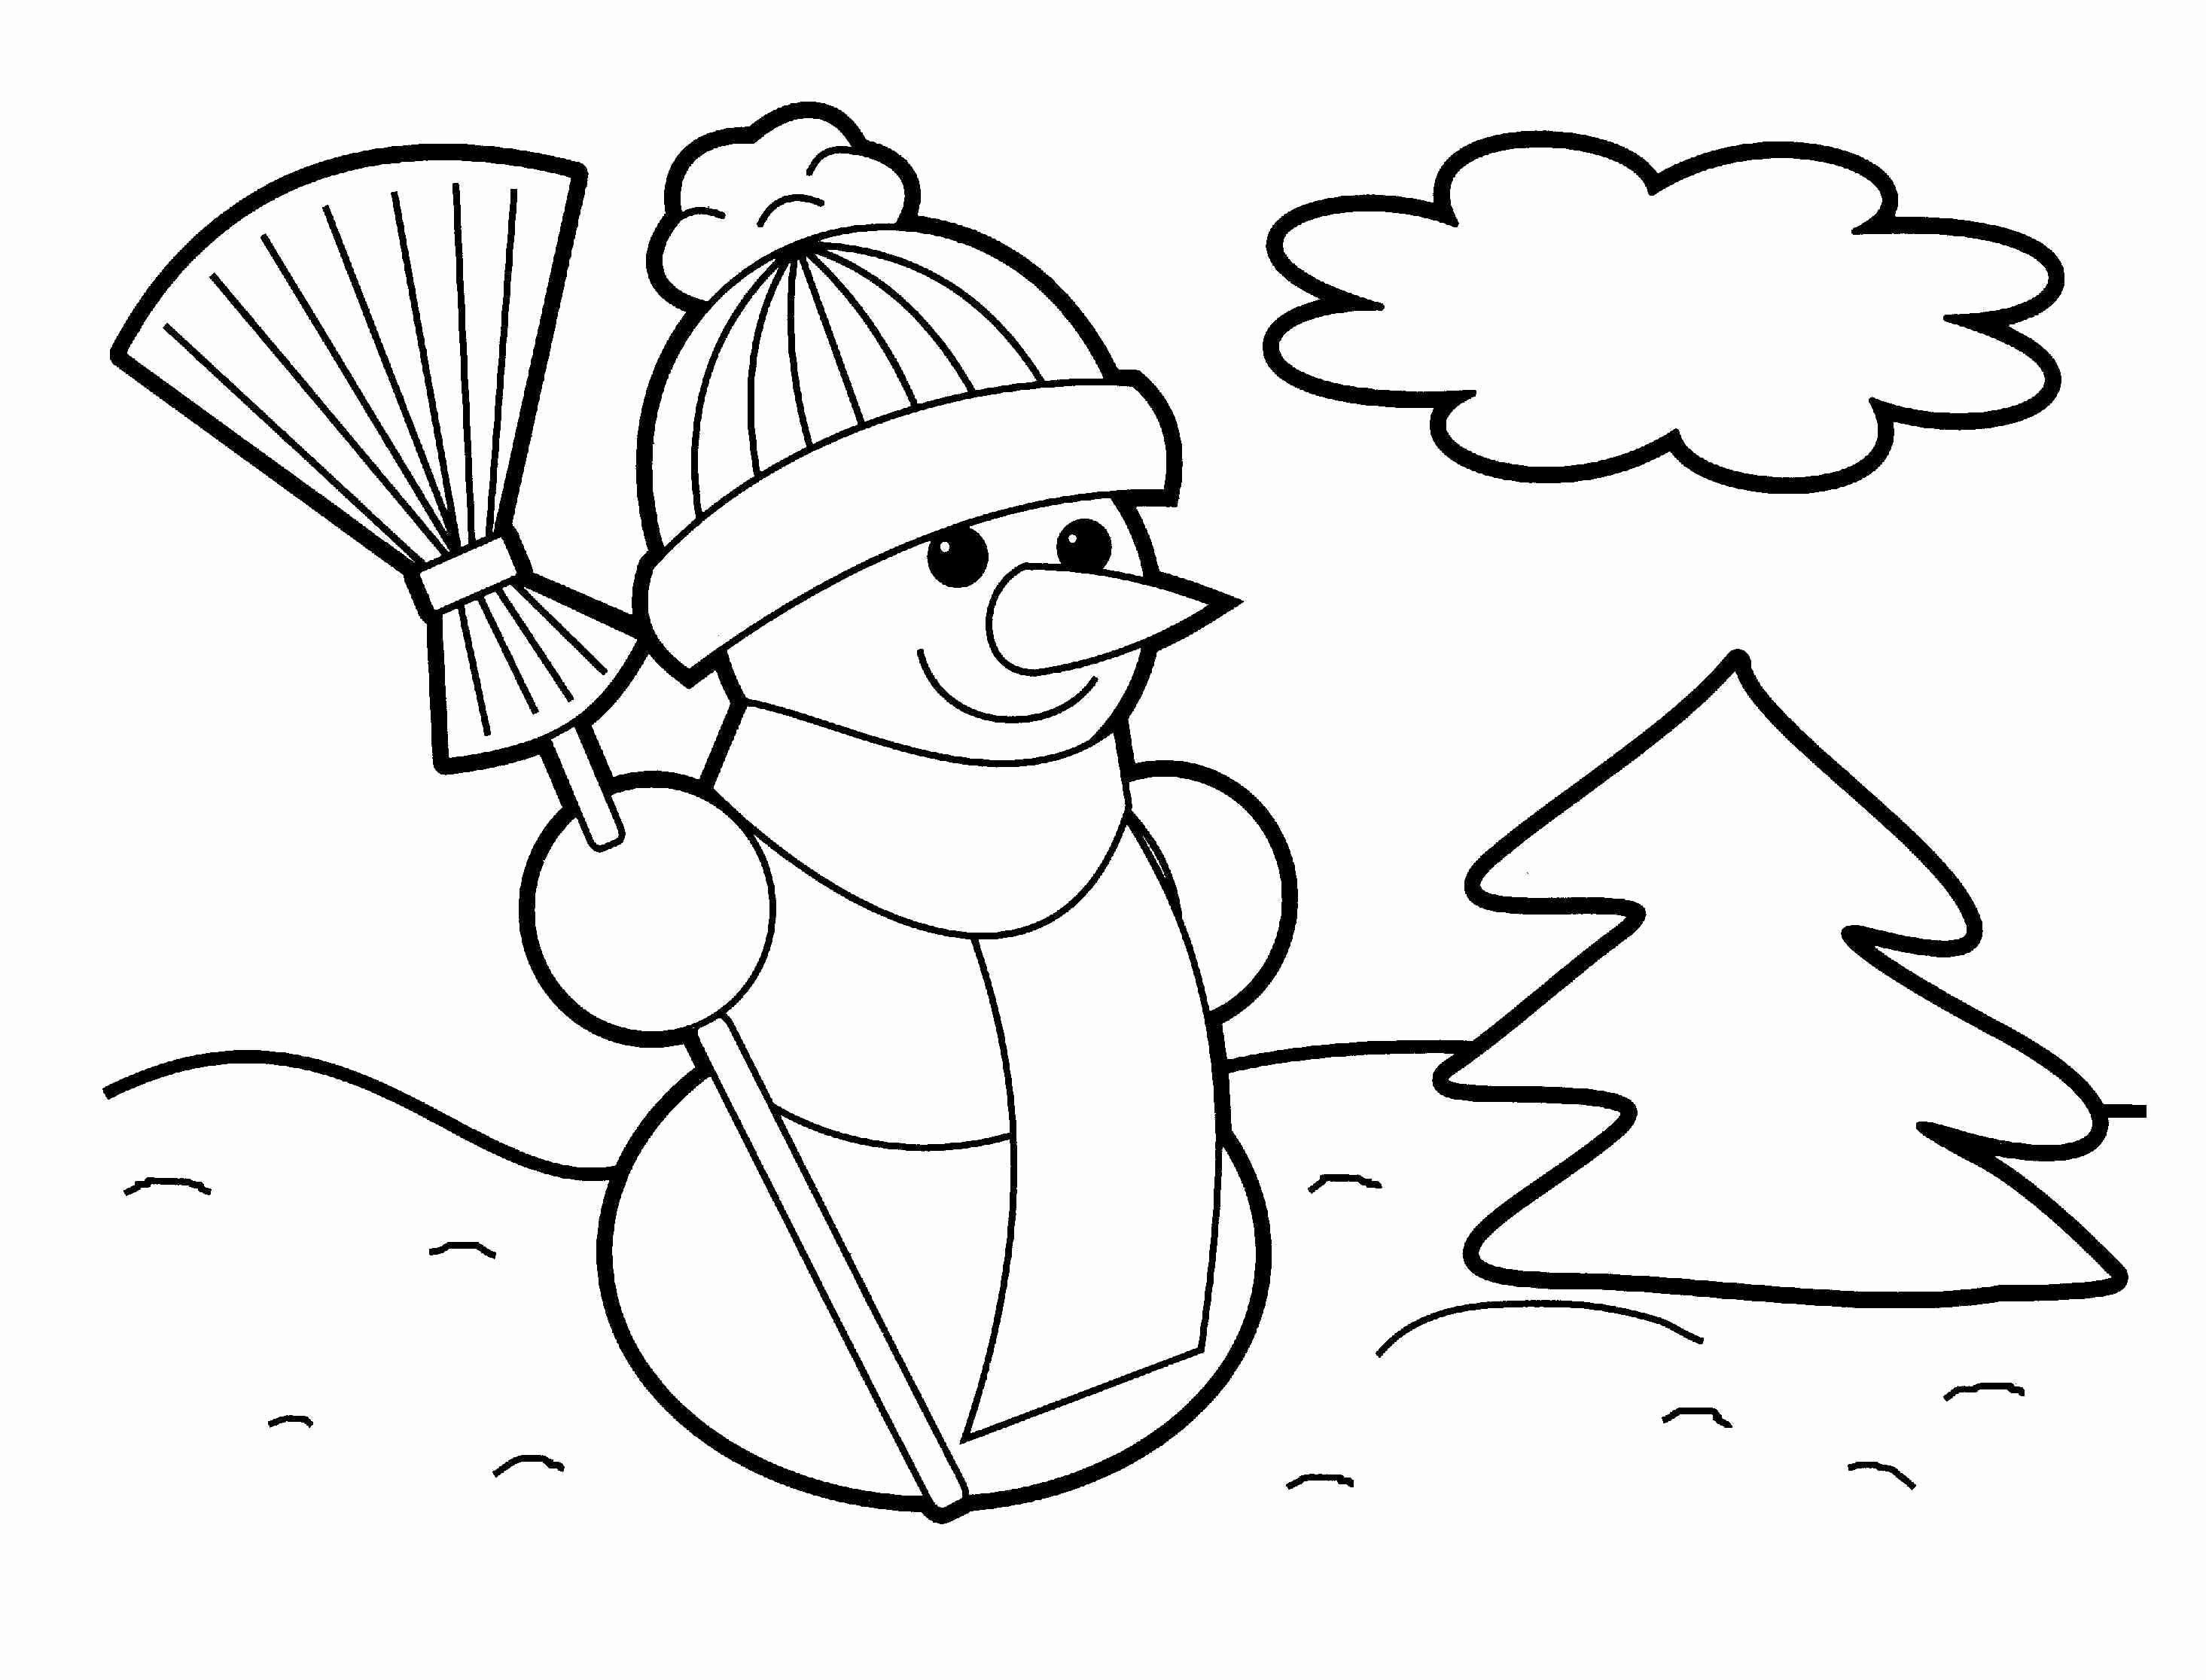 Math Christmas Coloring Pages Printable At GetDrawings Free Download